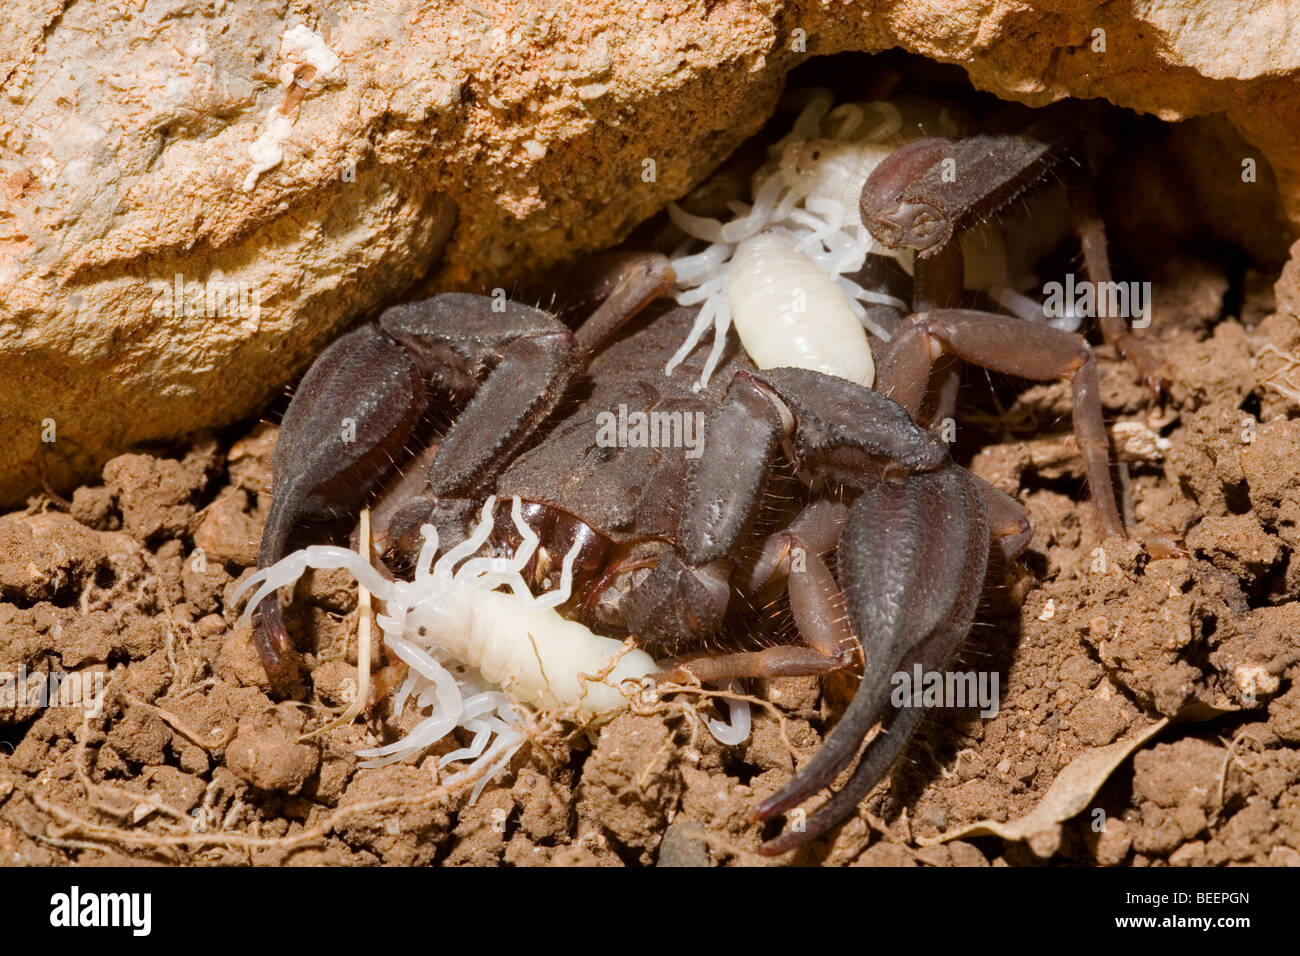 Female Iurus dufoureius scorpion with one day old young Stock Photo